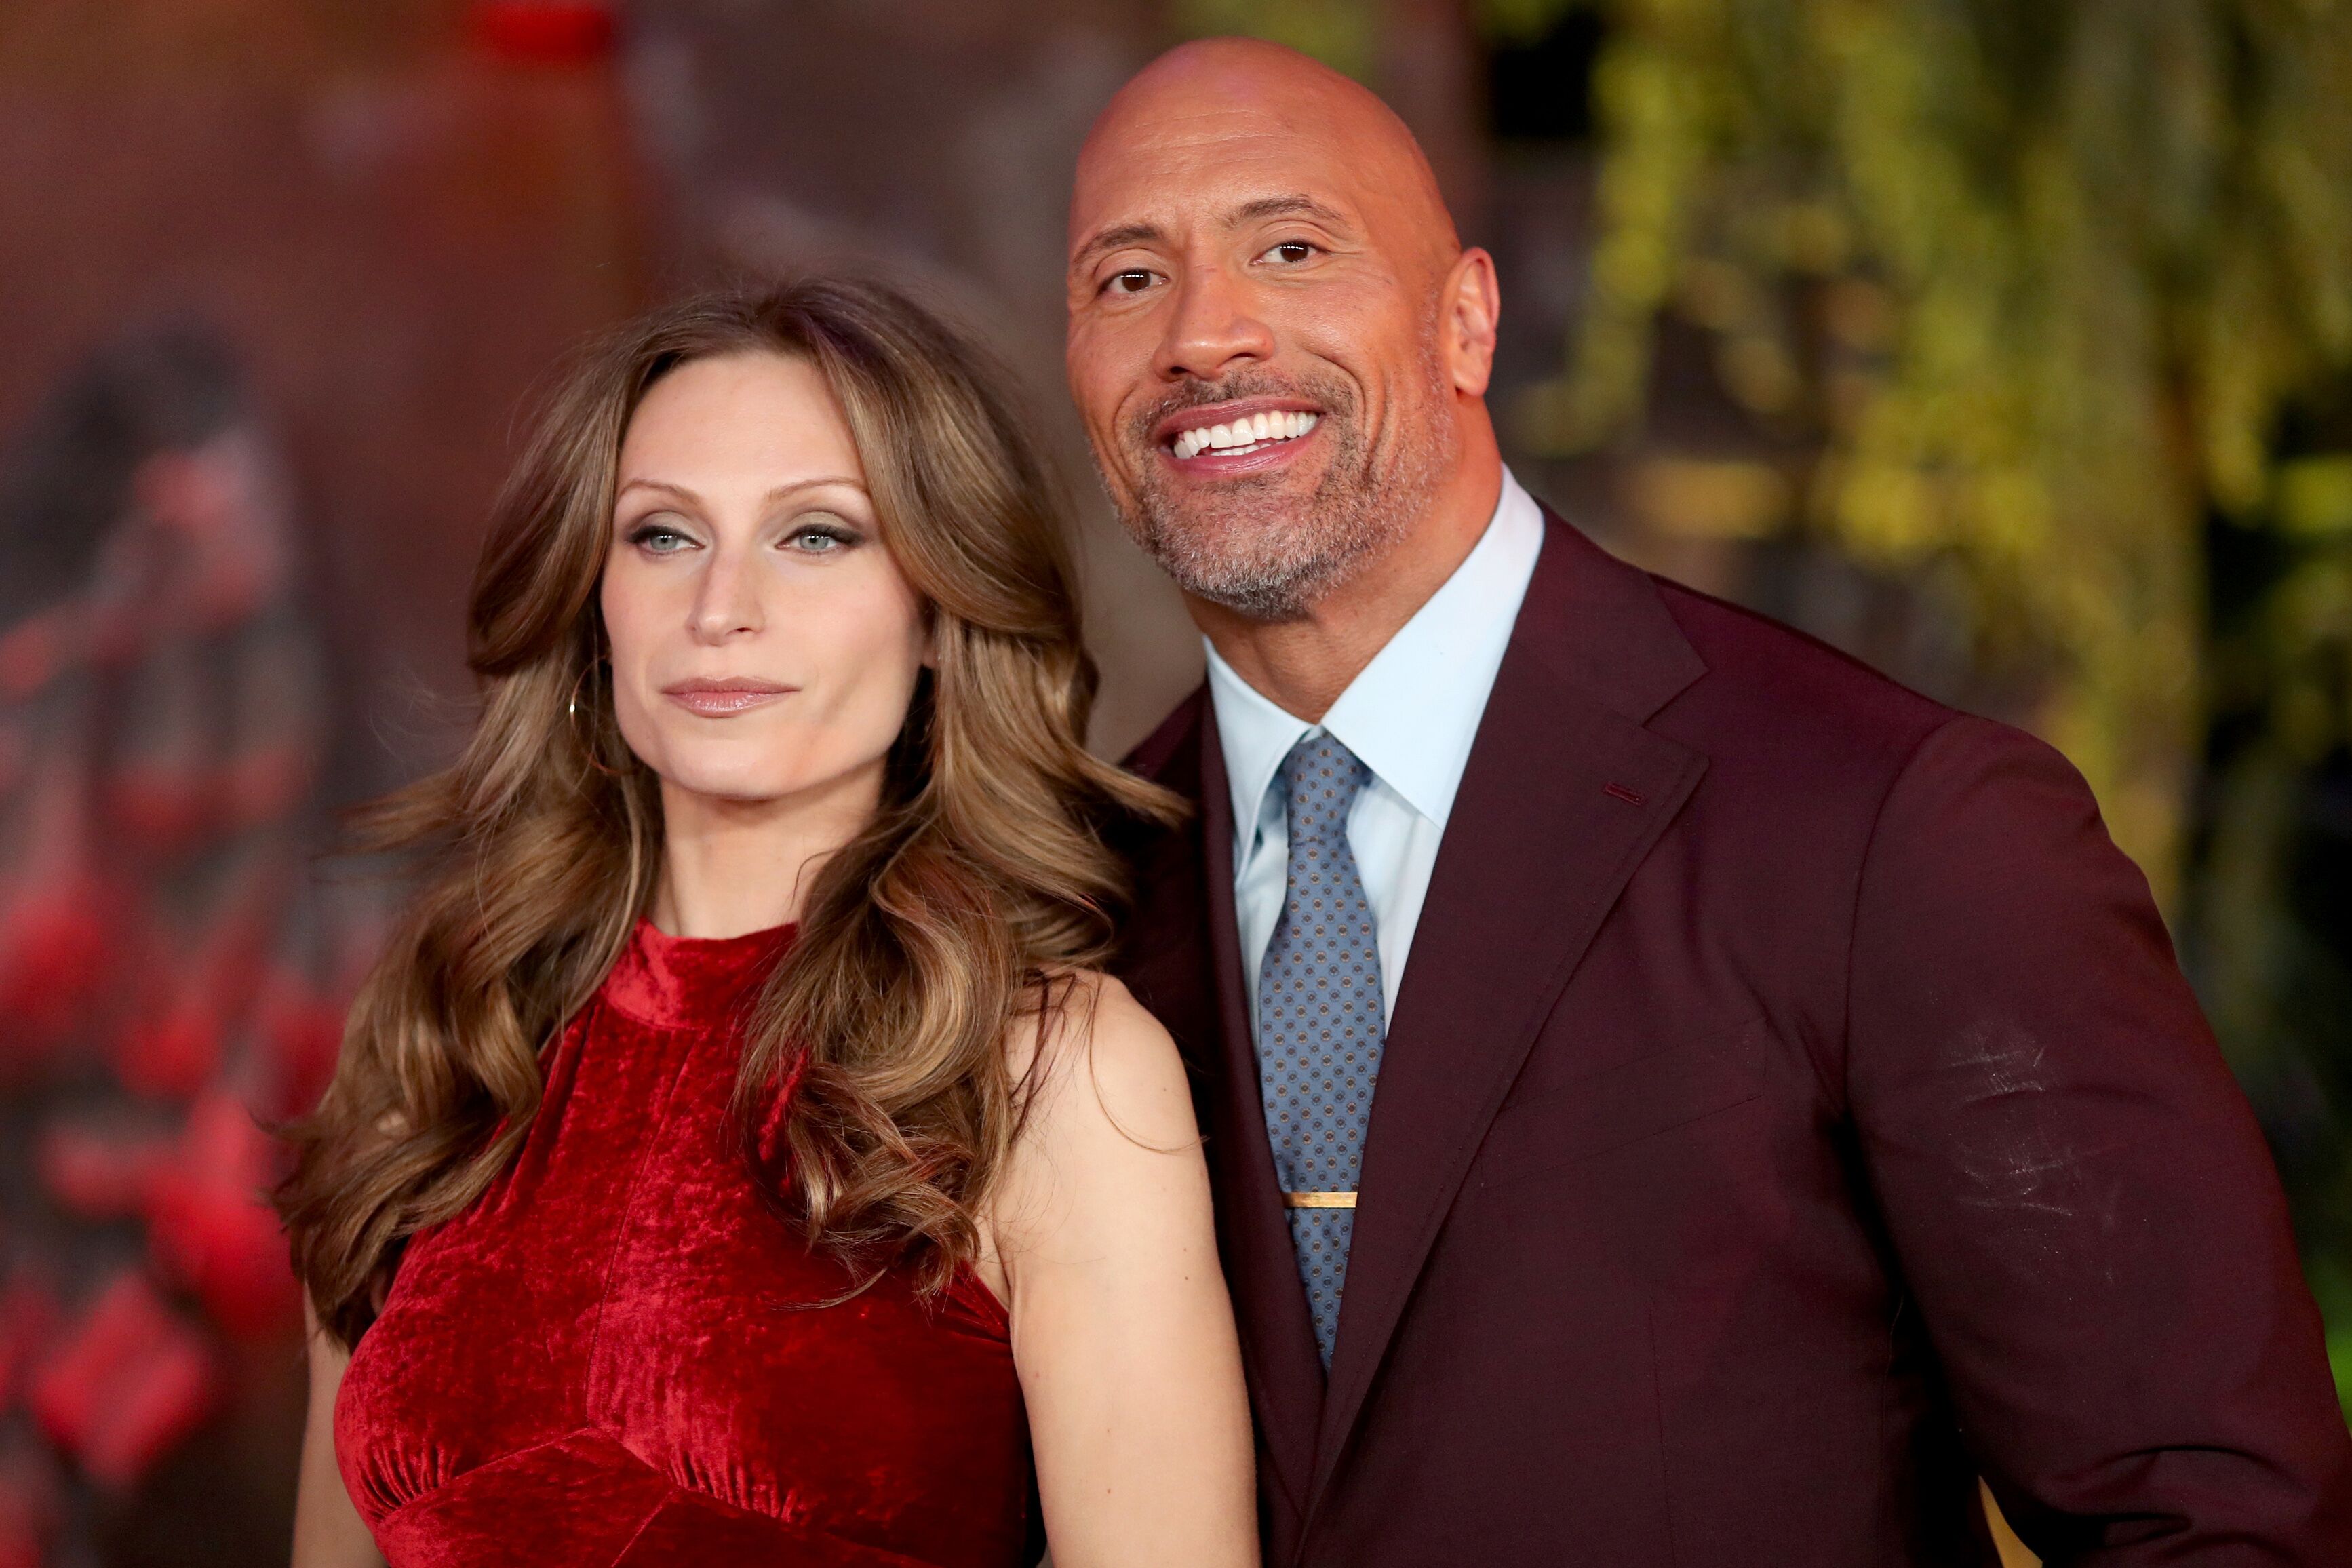 Lauren Hashian (L) and Dwayne Johnson attend the premiere of Columbia Pictures' "Jumanji: Welcome To The Jungle" on December 11, 2017 in Hollywood, California. | Photo: Getty Images